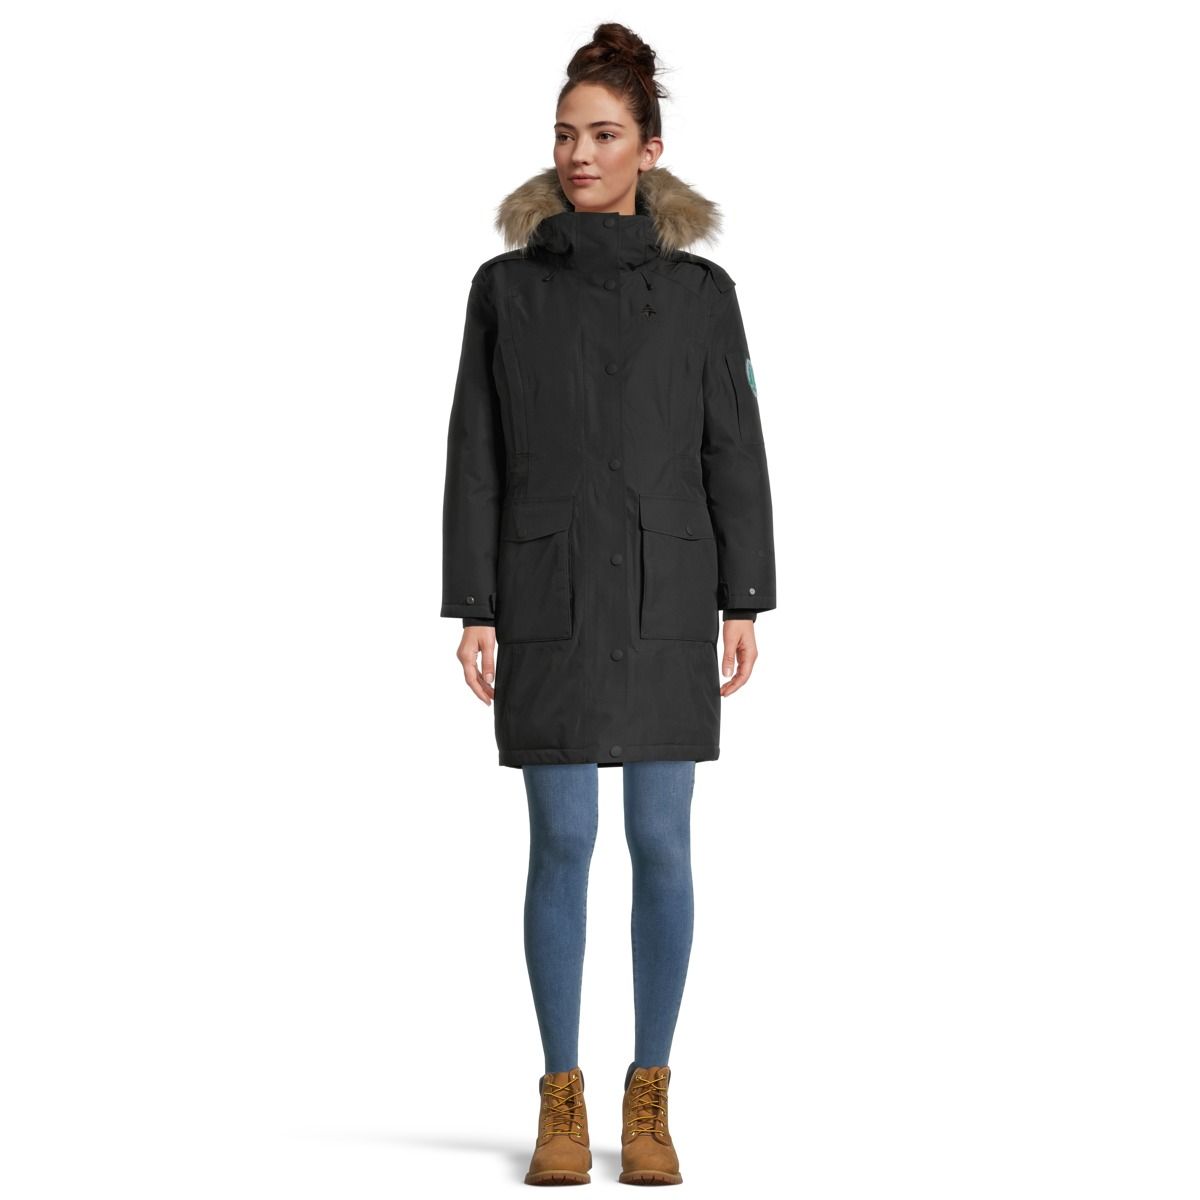 https://media-www.atmosphere.ca/product/div-03-softgoods/dpt-76-outerwear/sdpt-02-womens/333127500/woods-w-avens-insulated-parka-black-xs--90a575f3-05da-45e3-82ba-e362f38cd31c-jpgrendition.jpg?imdensity=1&imwidth=1244&impolicy=mZoom